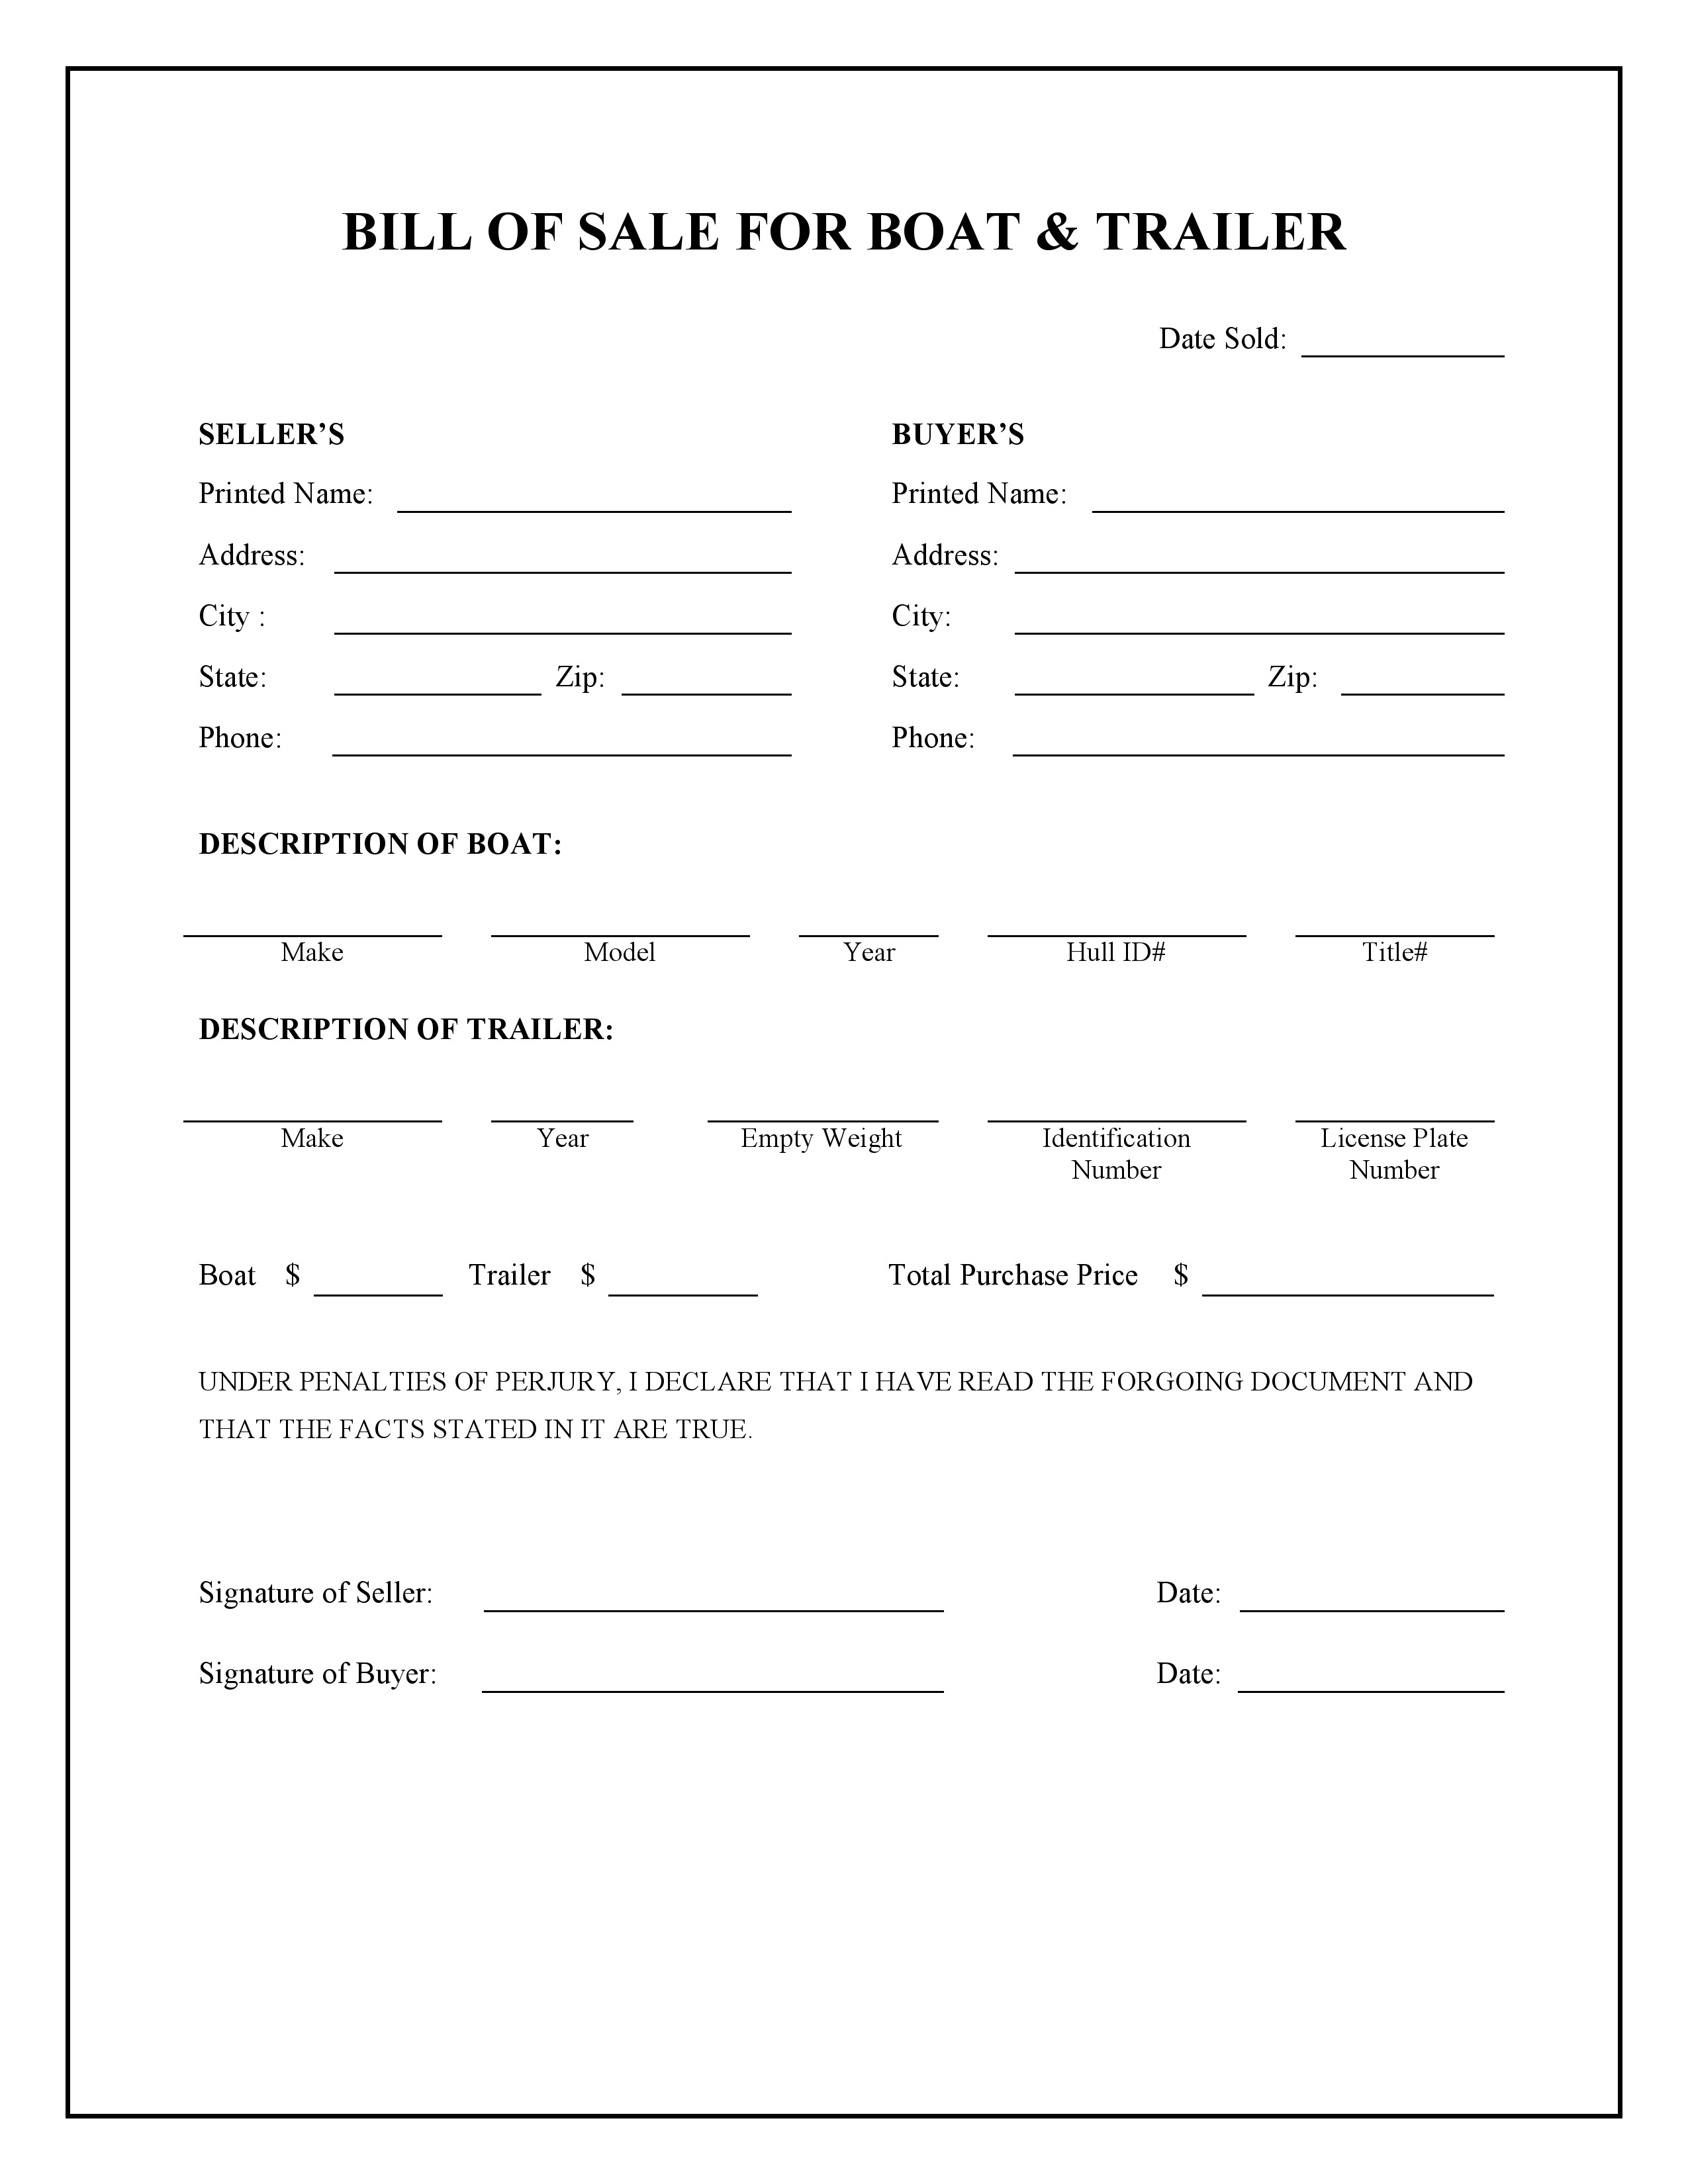 free boat and trailer bill of sale form pdf word do it yourself forms